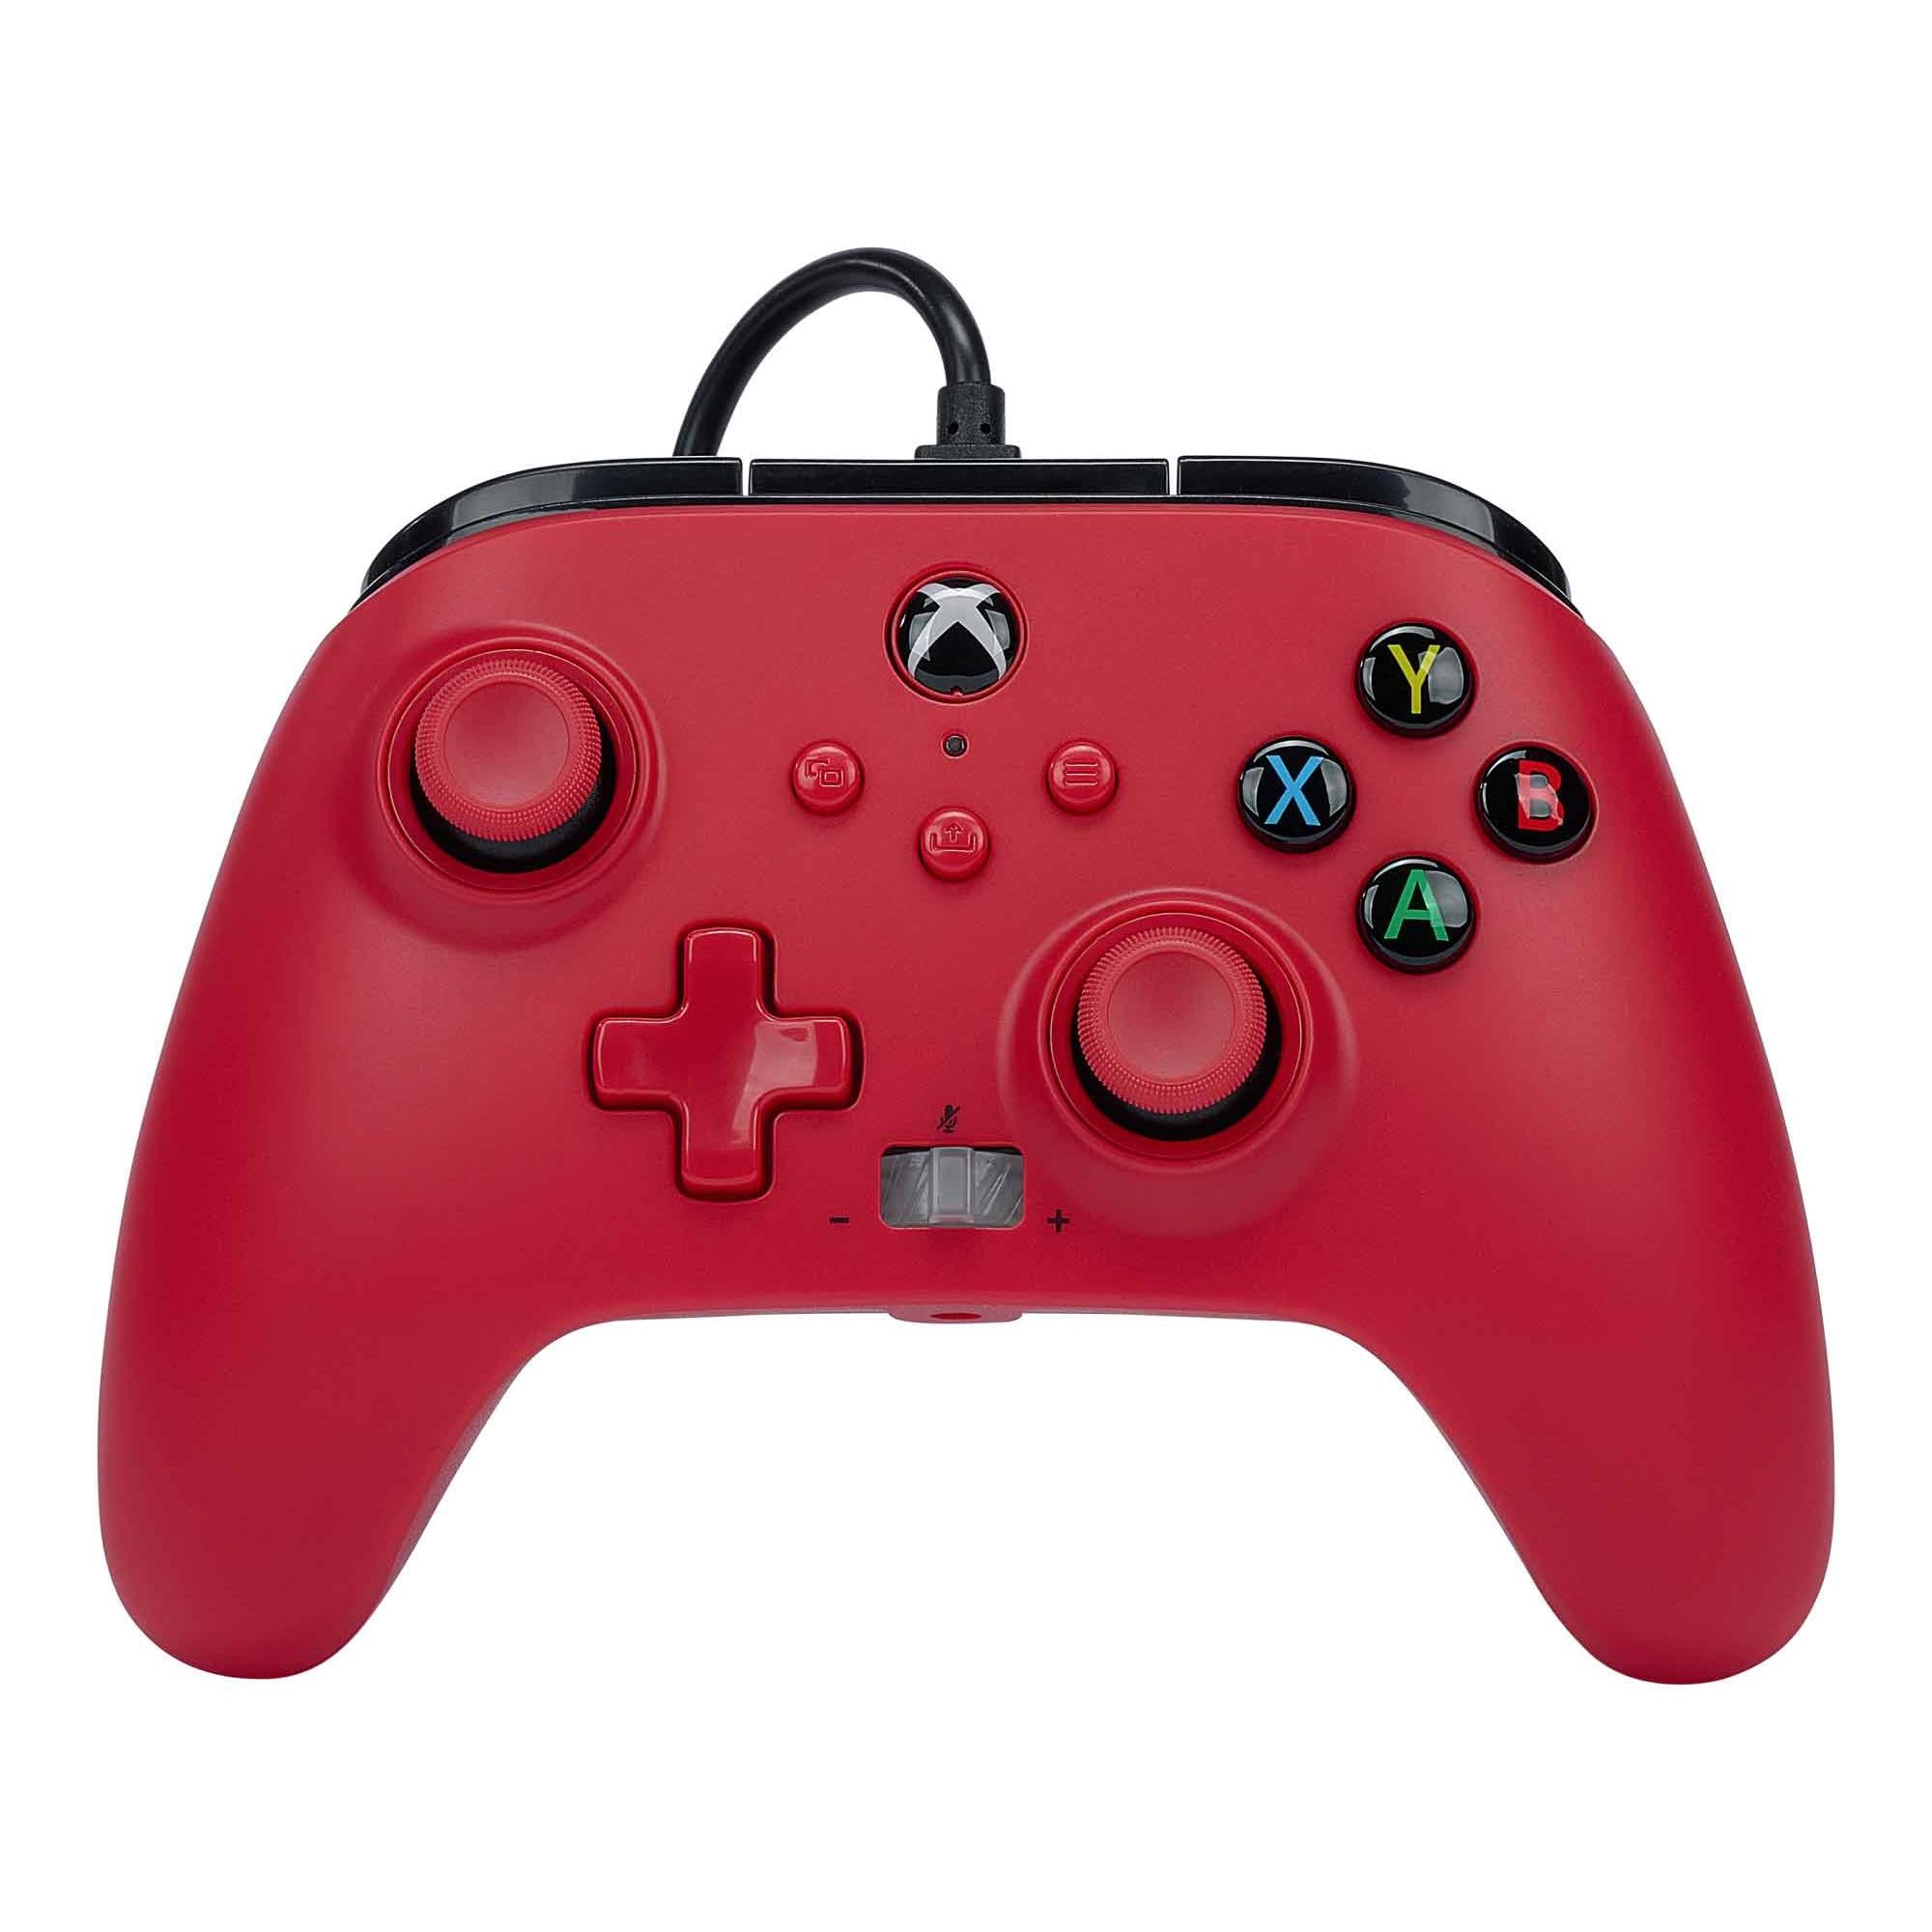 powera enhanced wired controller for xbox series x|s (artisan red)